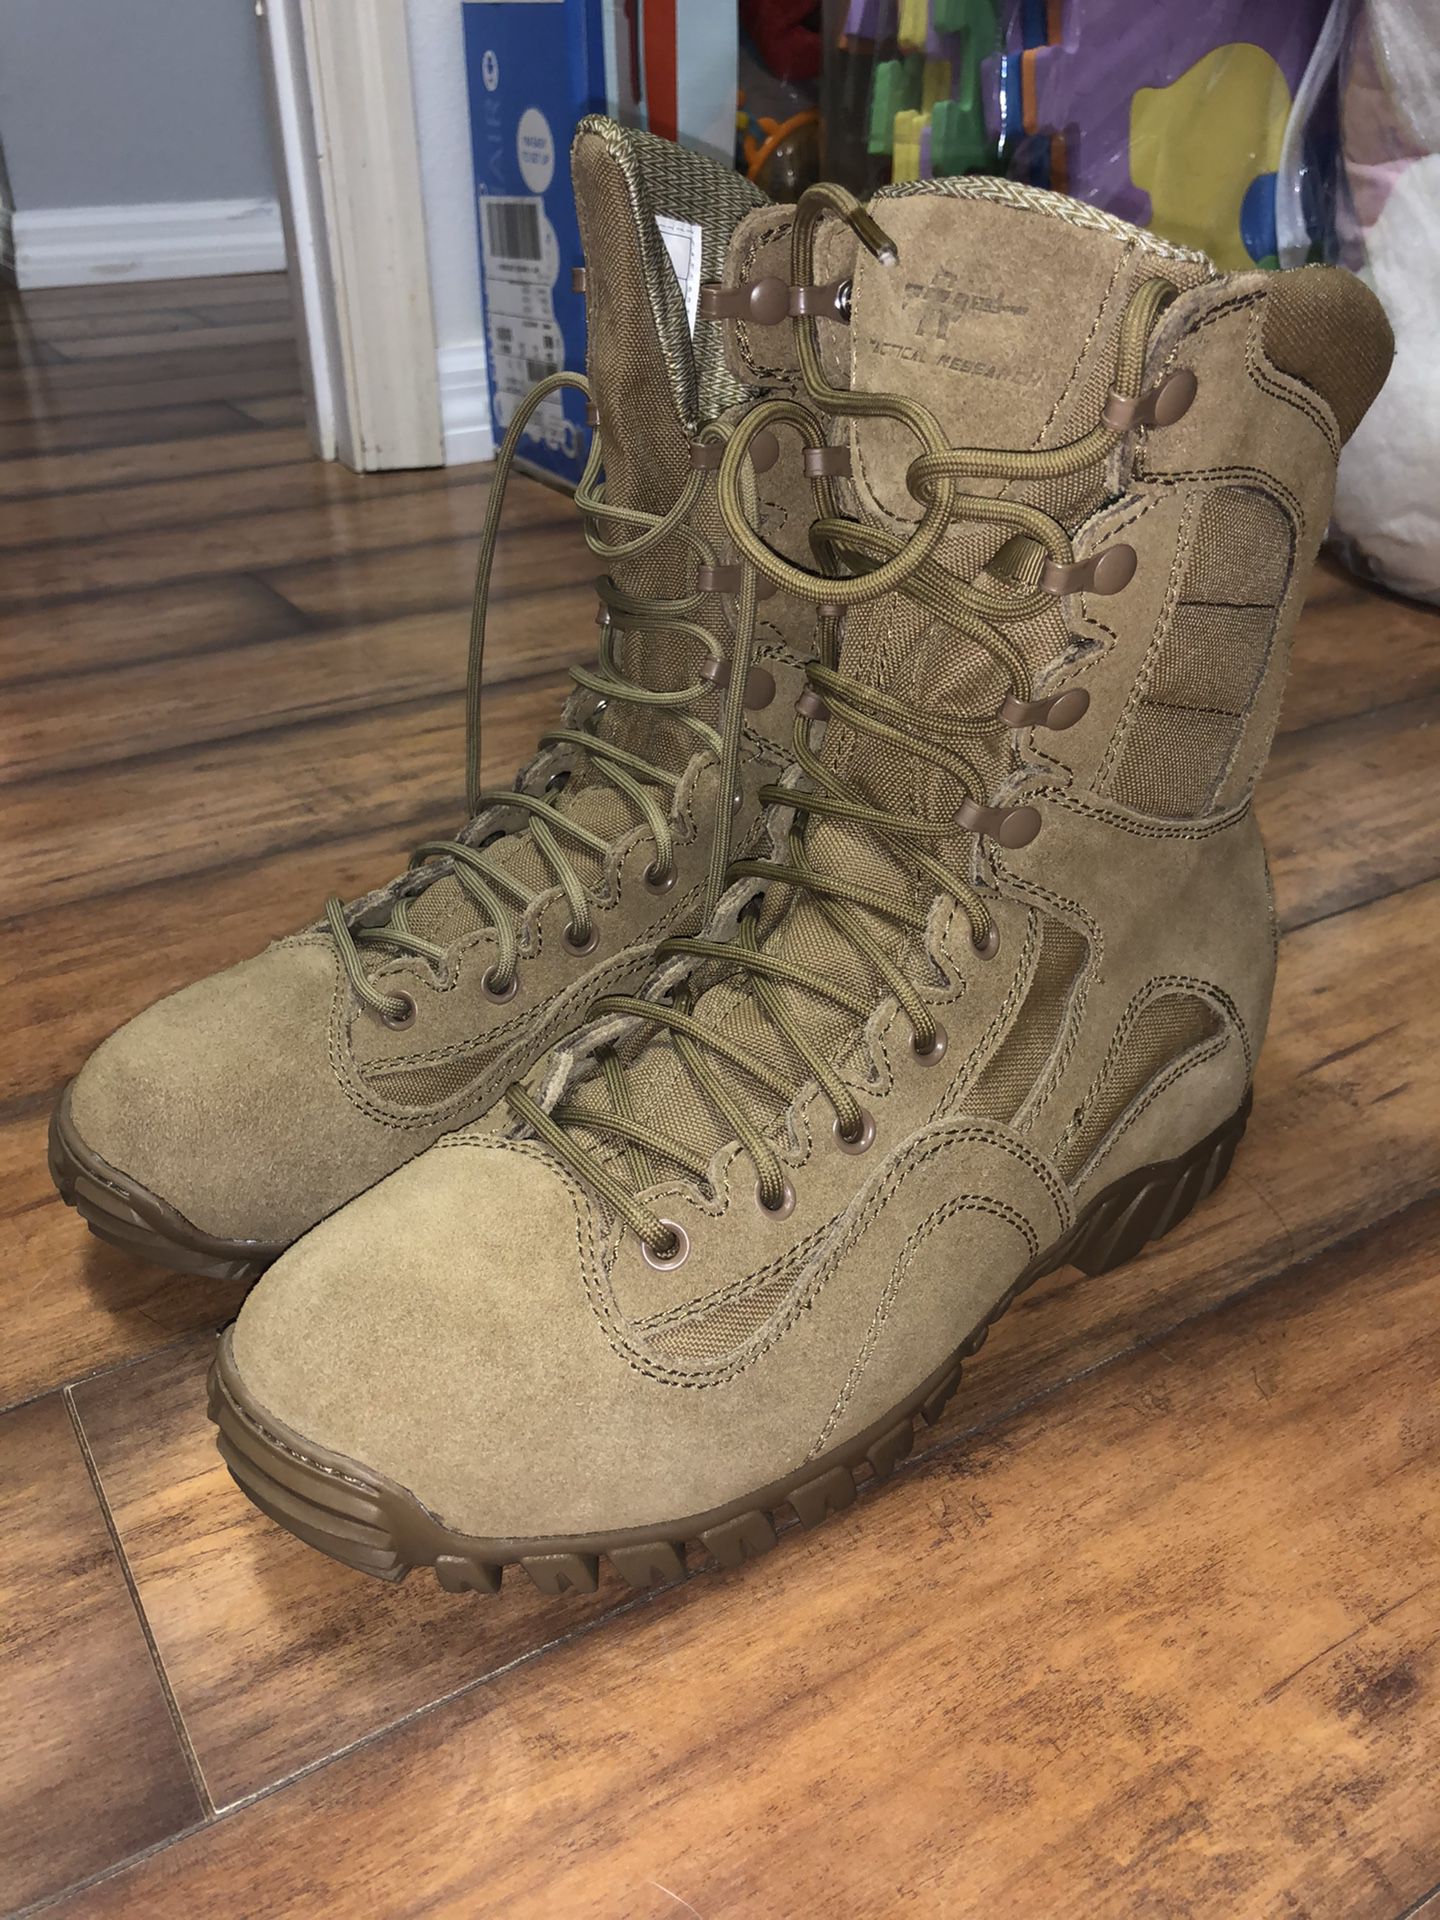 Tactical research boots